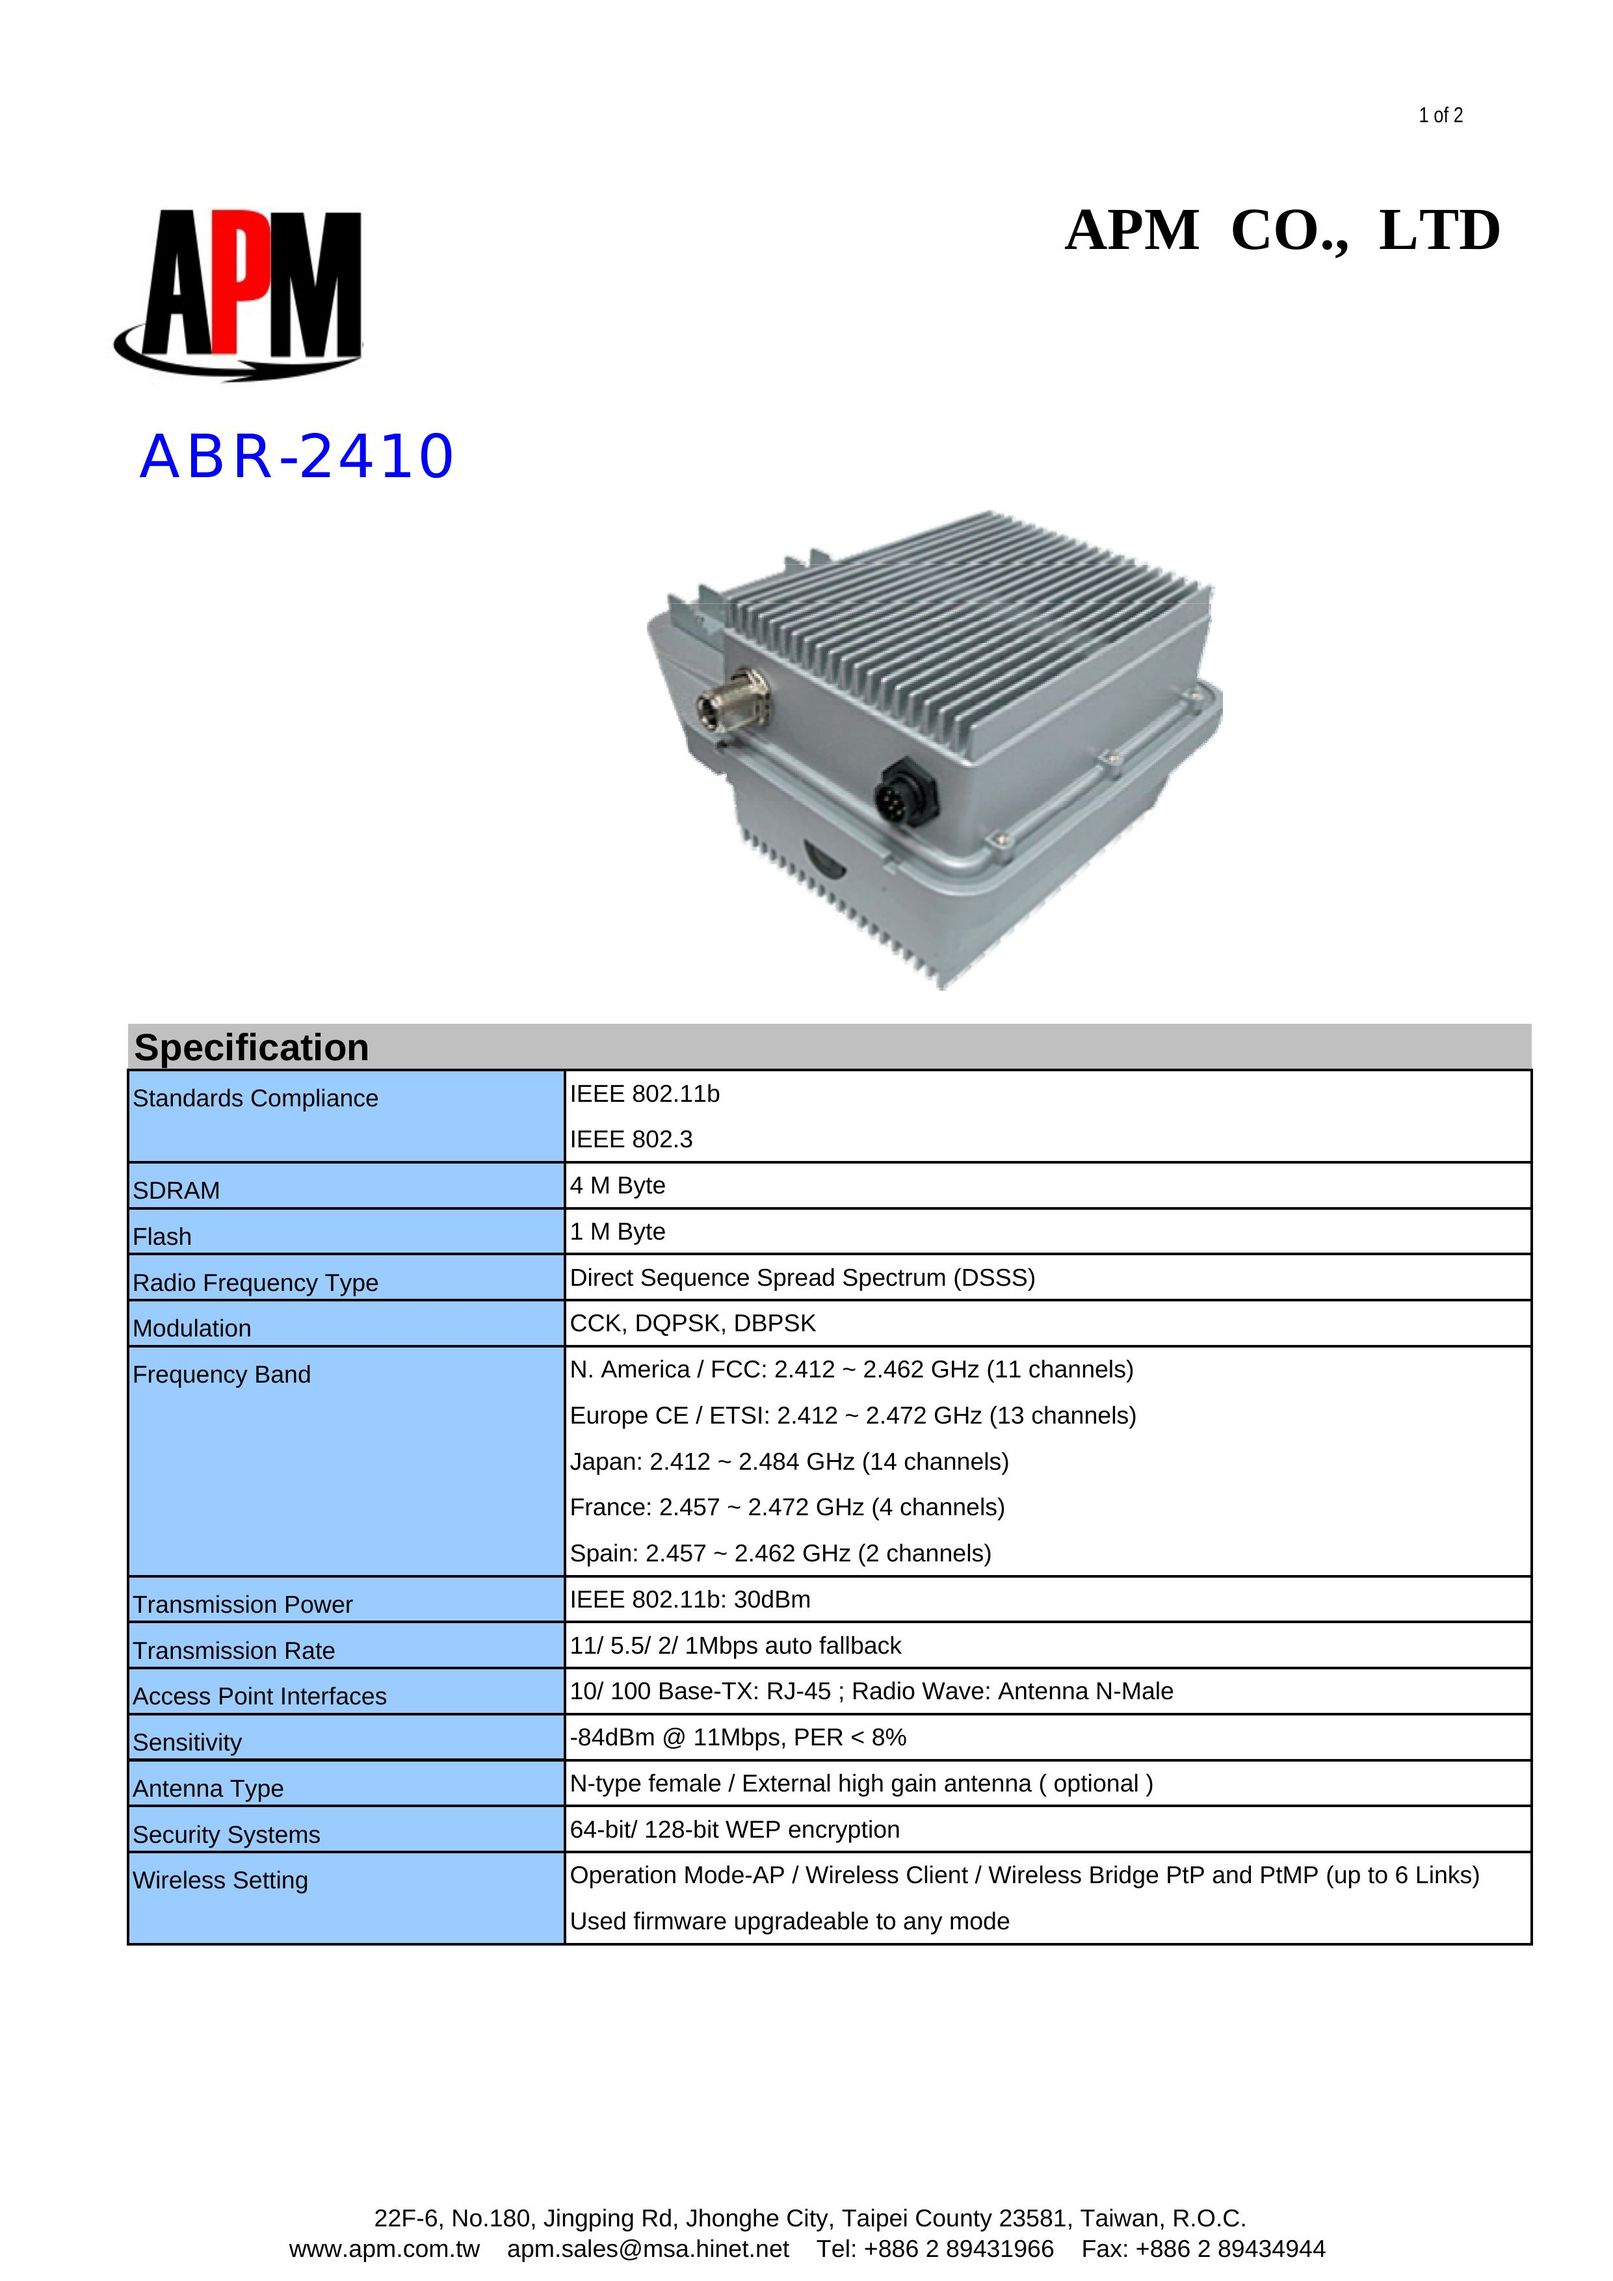 APM ABR-2410 Network Router User Manual